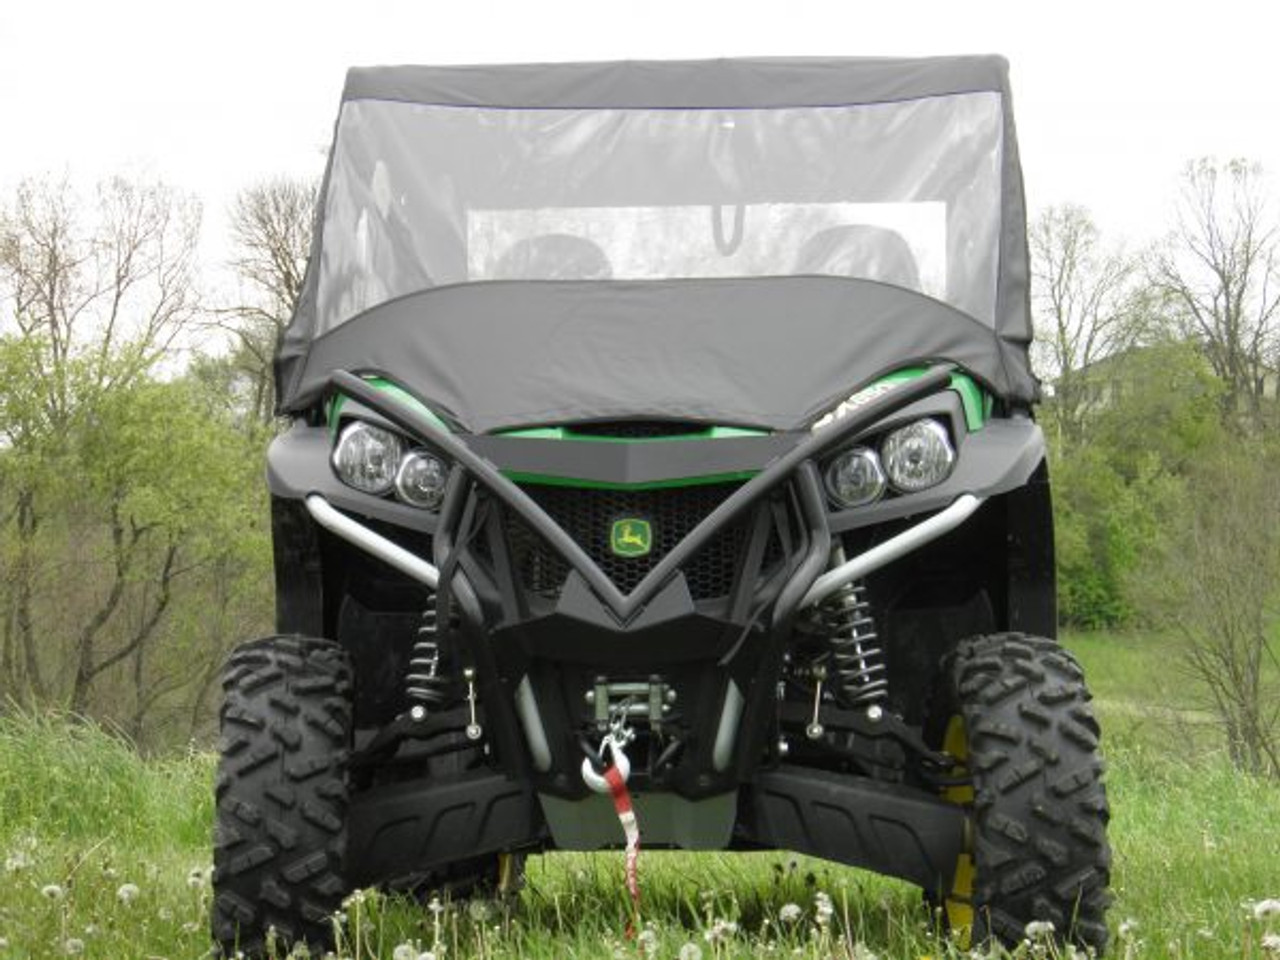 John Deere Gator RSX 850/860 Full Cab Enclosure with Vinyl Windshield front view